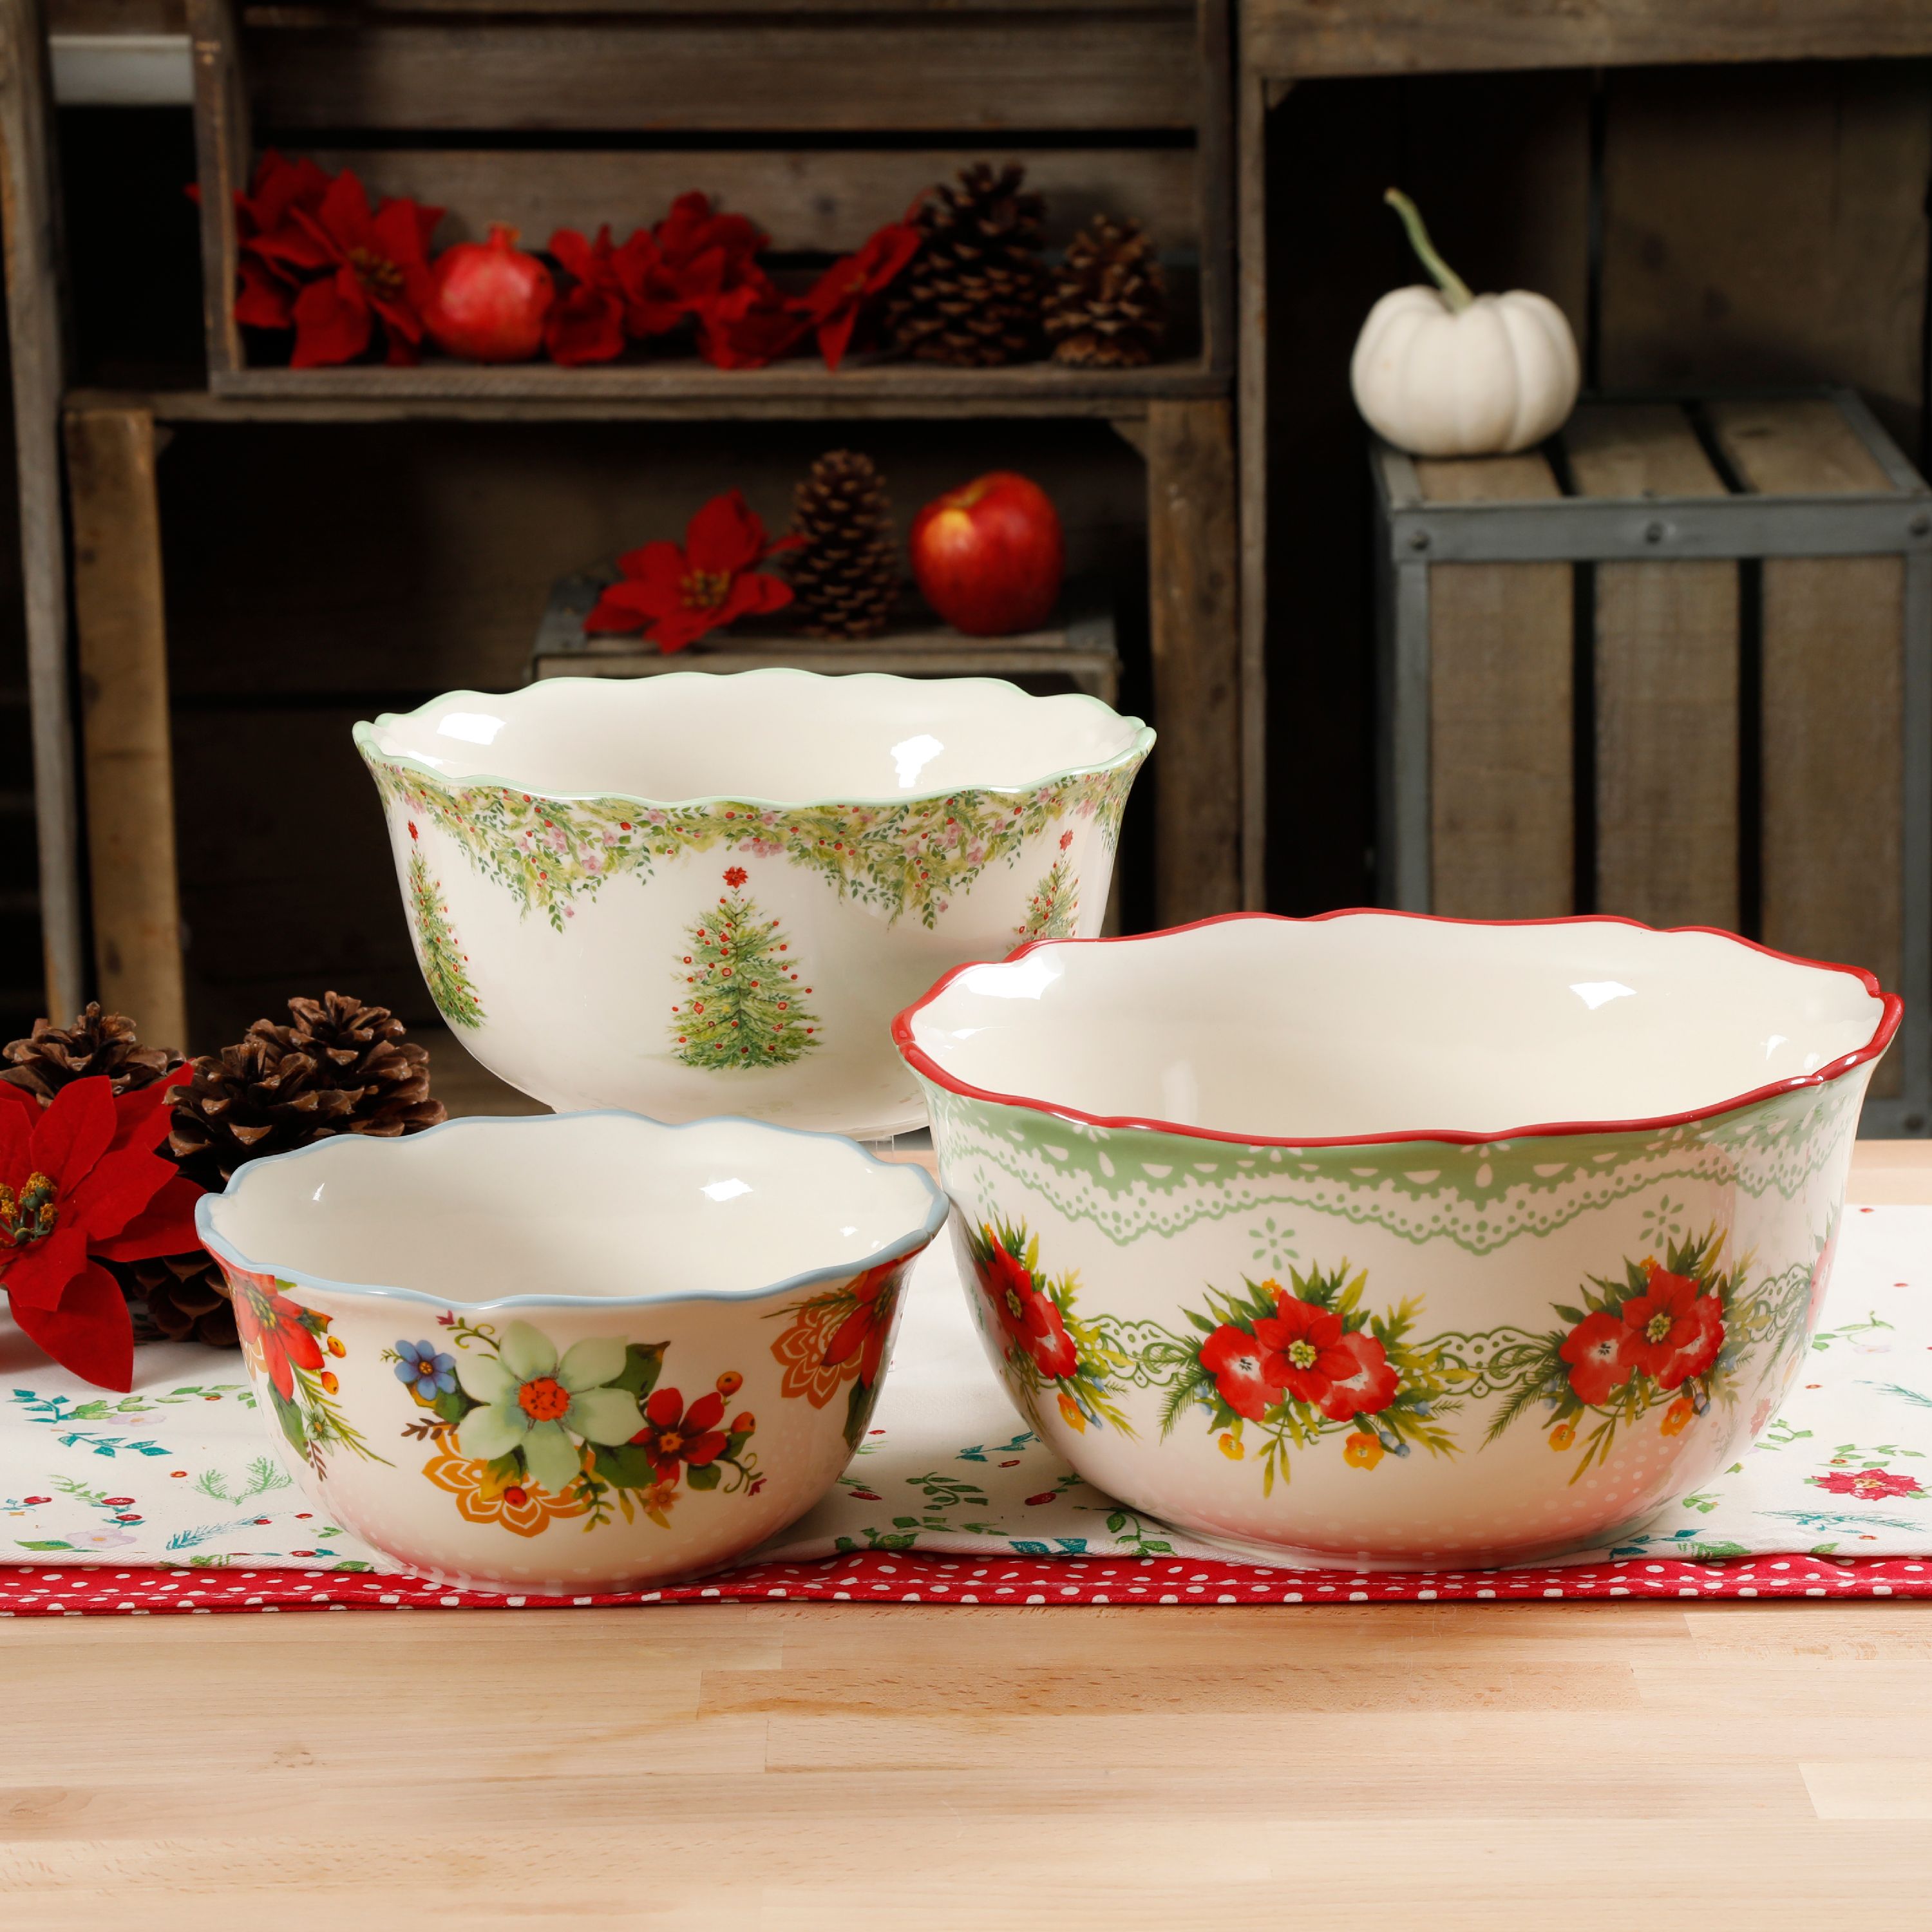 The Pioneer Woman Mint Bowl Set, 3 Piece - image 1 of 5